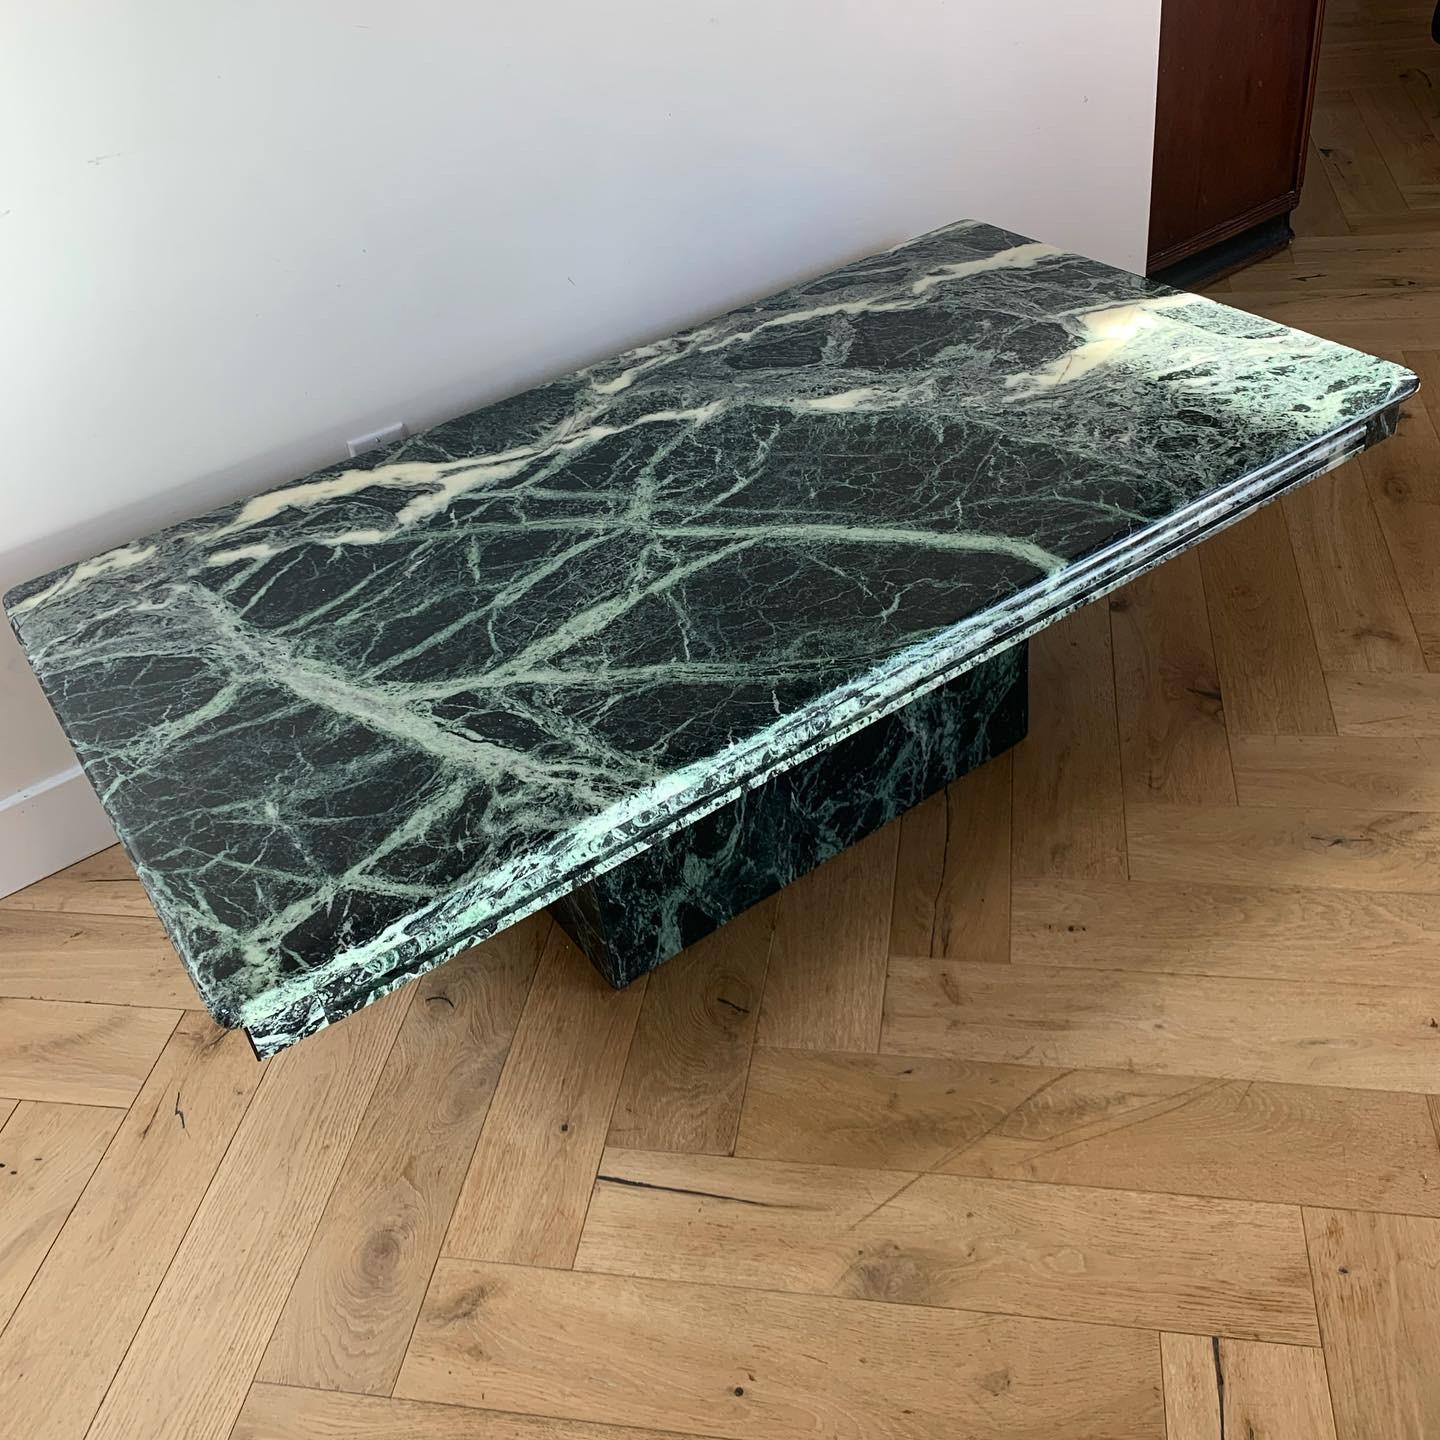 Vintage Italian pedestal marble coffee table by Natuzzi in deep phthalo green with sumptuous ivory and seafoam veining. Minor light scratches but no losses; overall fabulous  condition. Table is two pieces, which facilitates storage and transport.